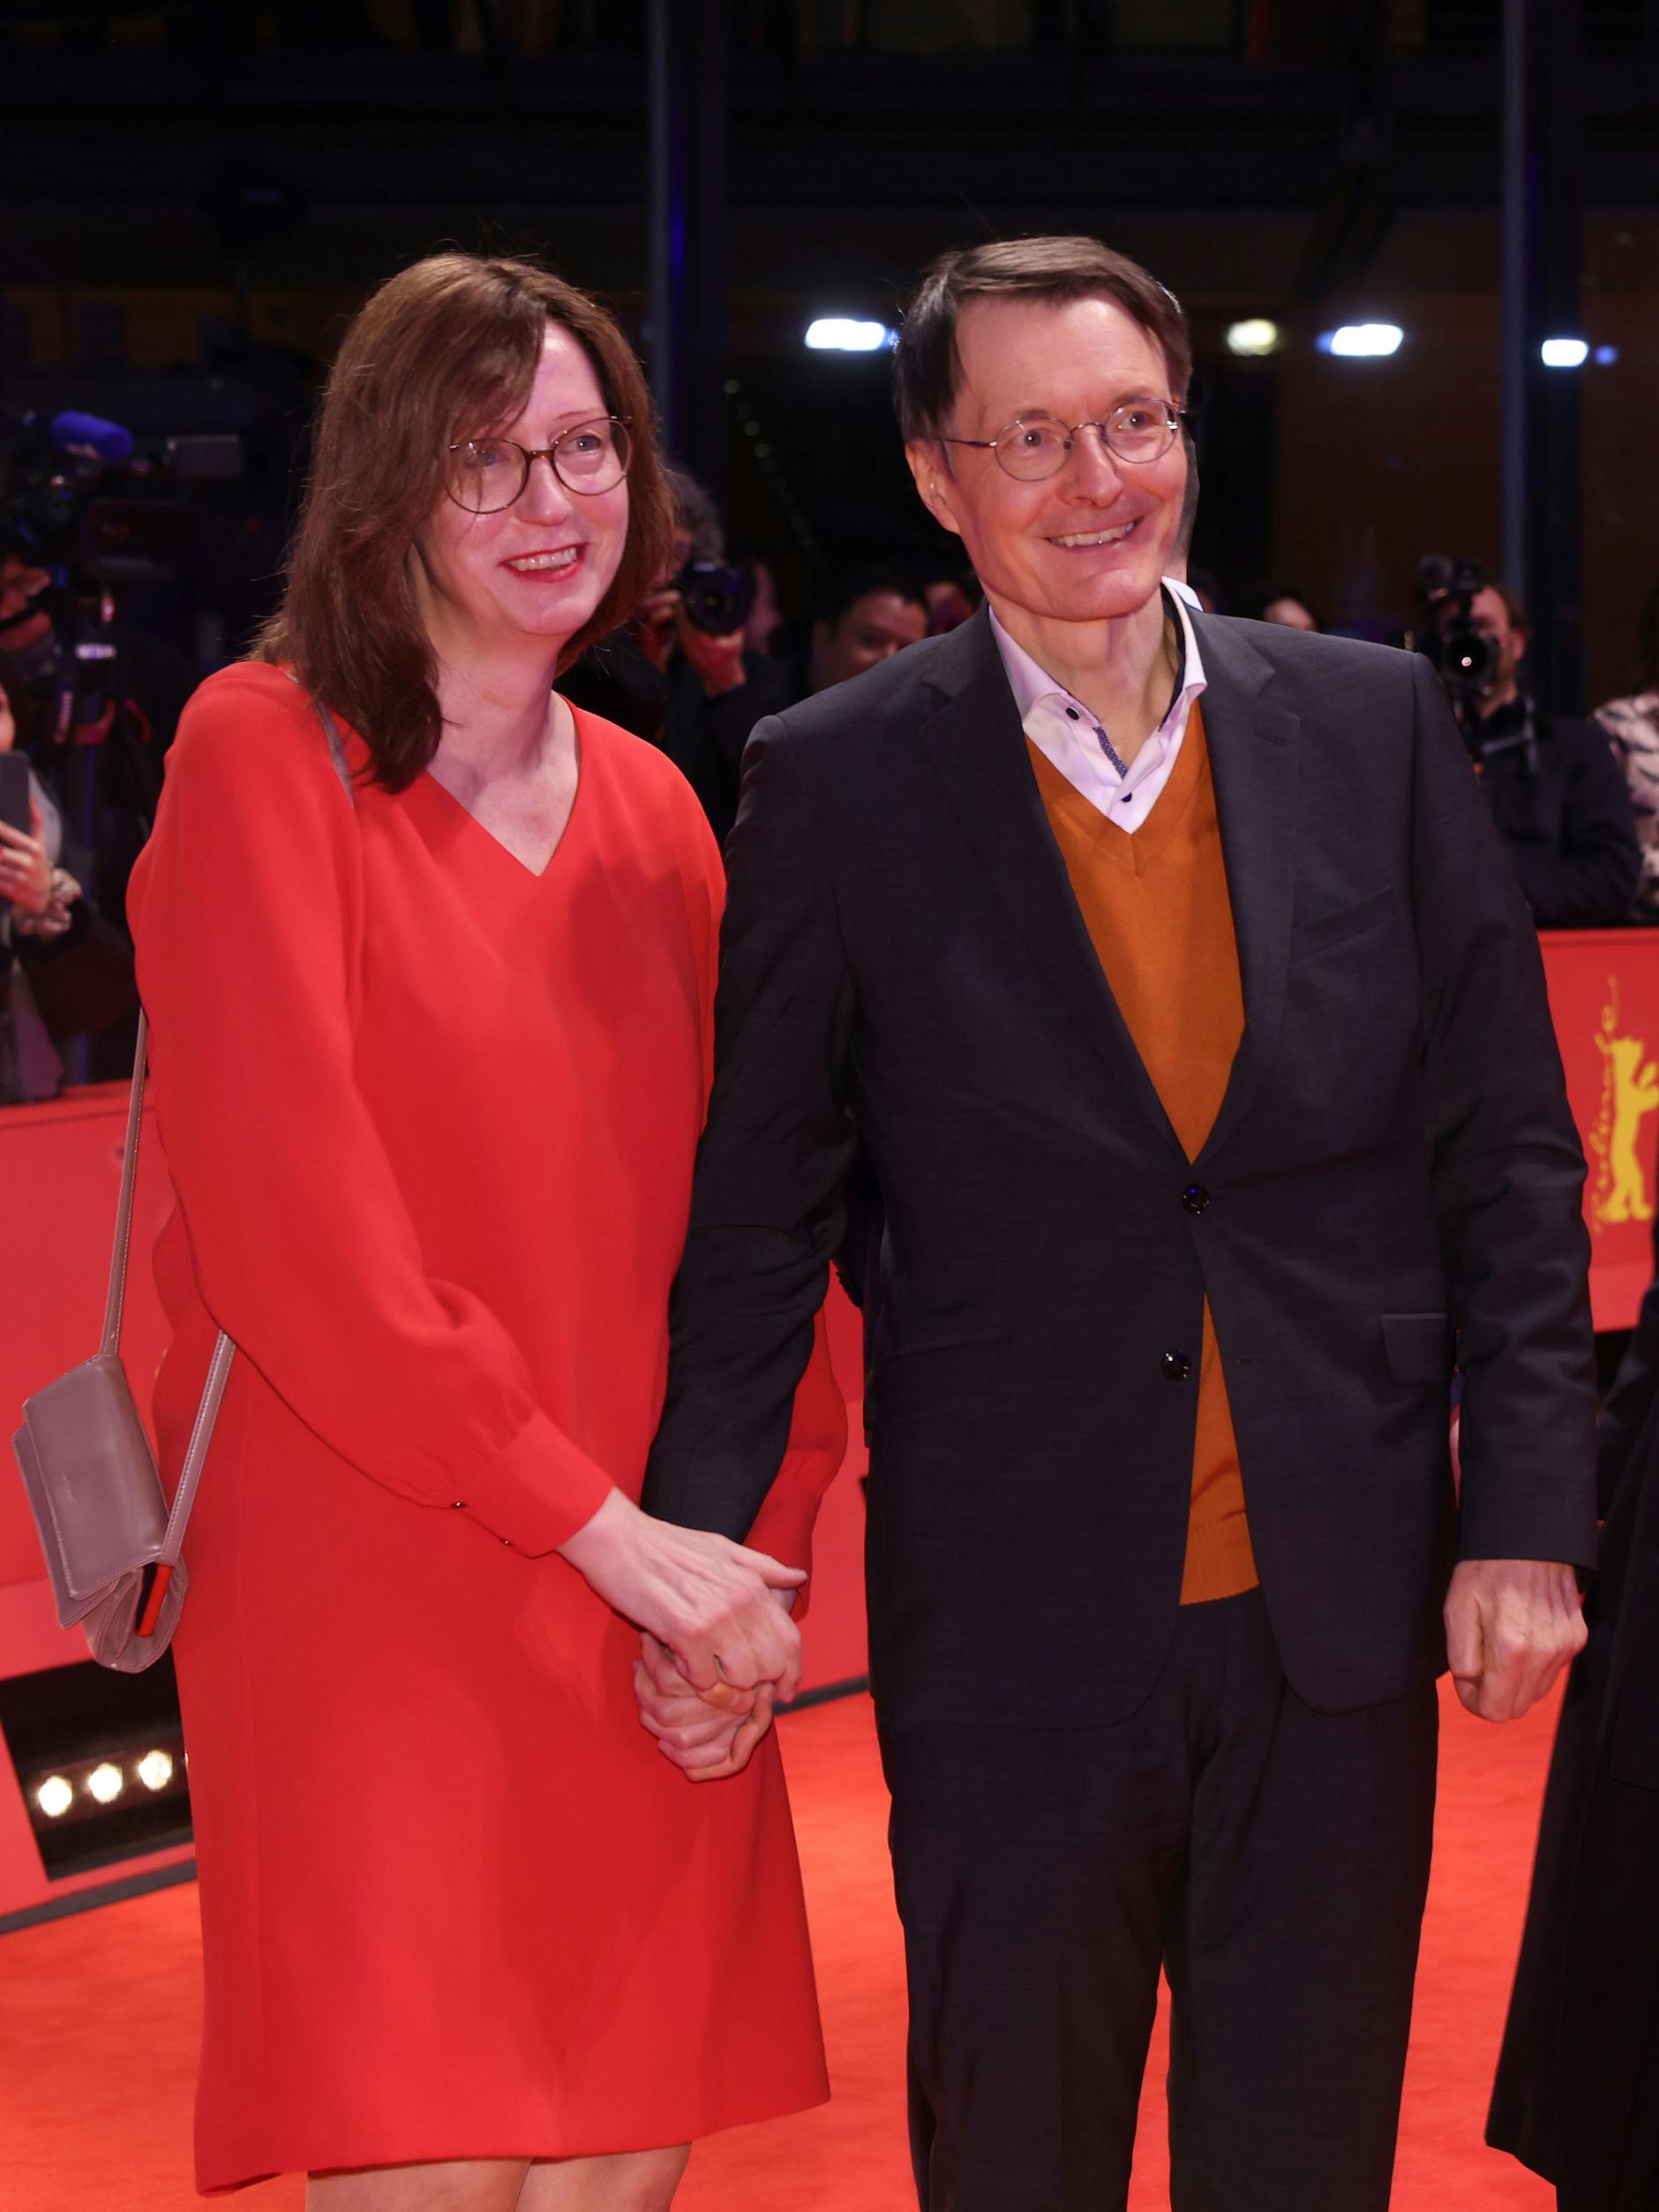 Karl Lauterbach (SPD) walks the carpet with his new girlfriend, the journalist Elisabeth Niejahr, on the opening night of the Berlinale.